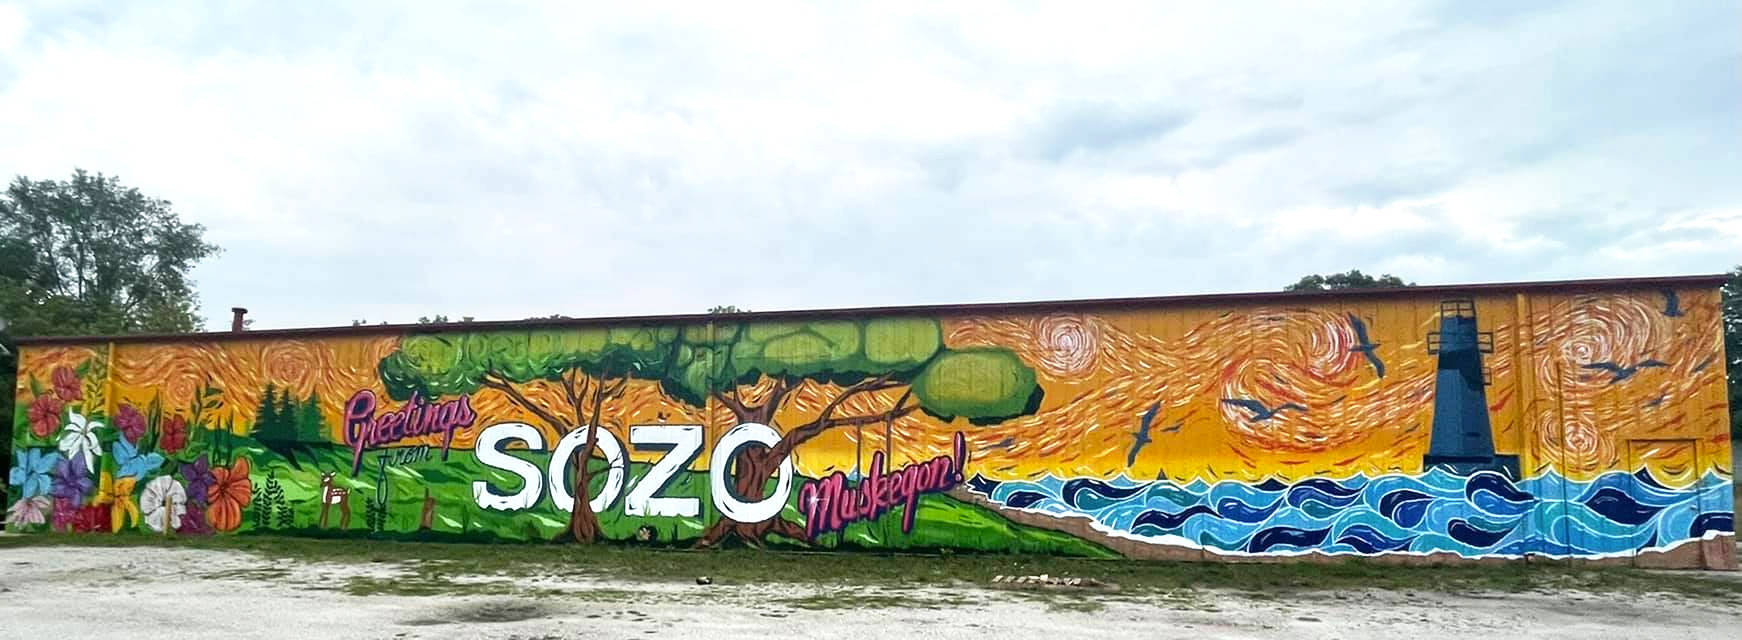 Sozo Cannabis Mural by Muskegon City Government